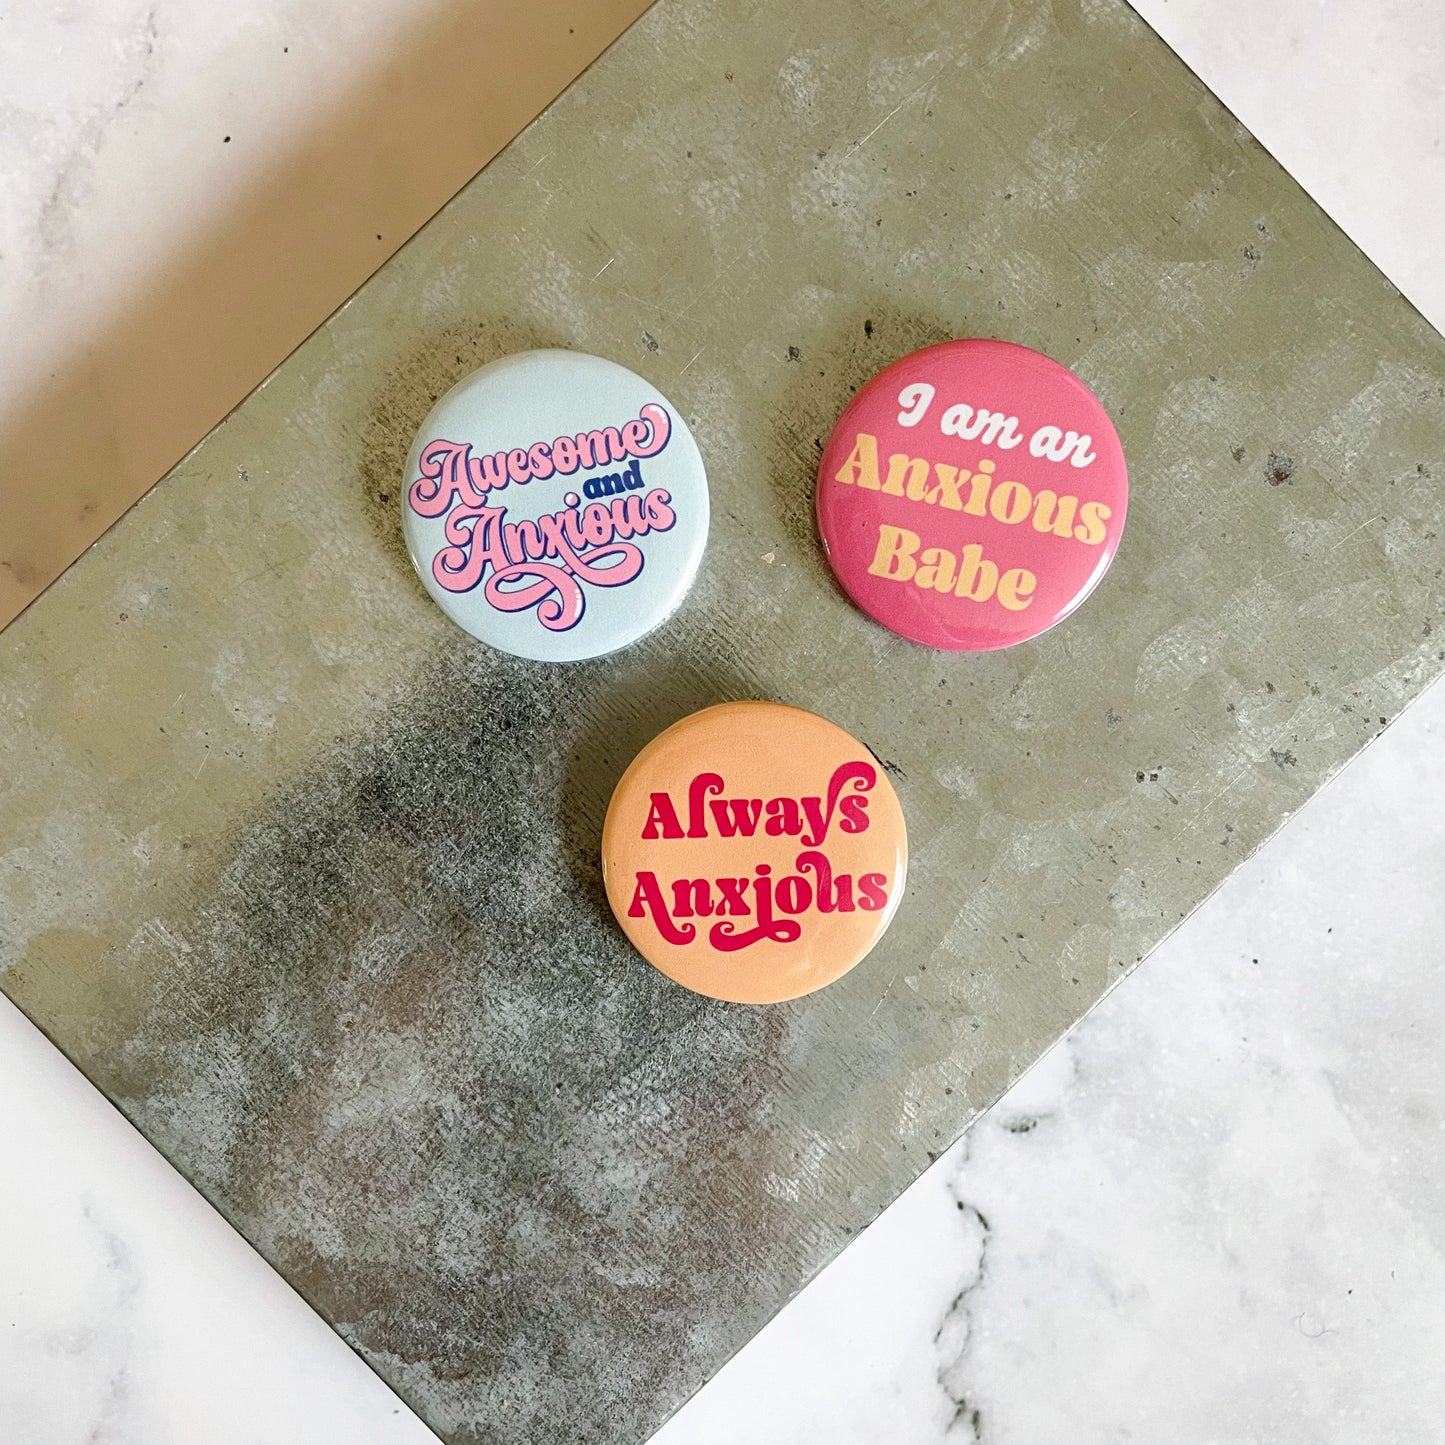 Awesome & Anxious Button / Badge (Buy 4 Get 1 FREE)